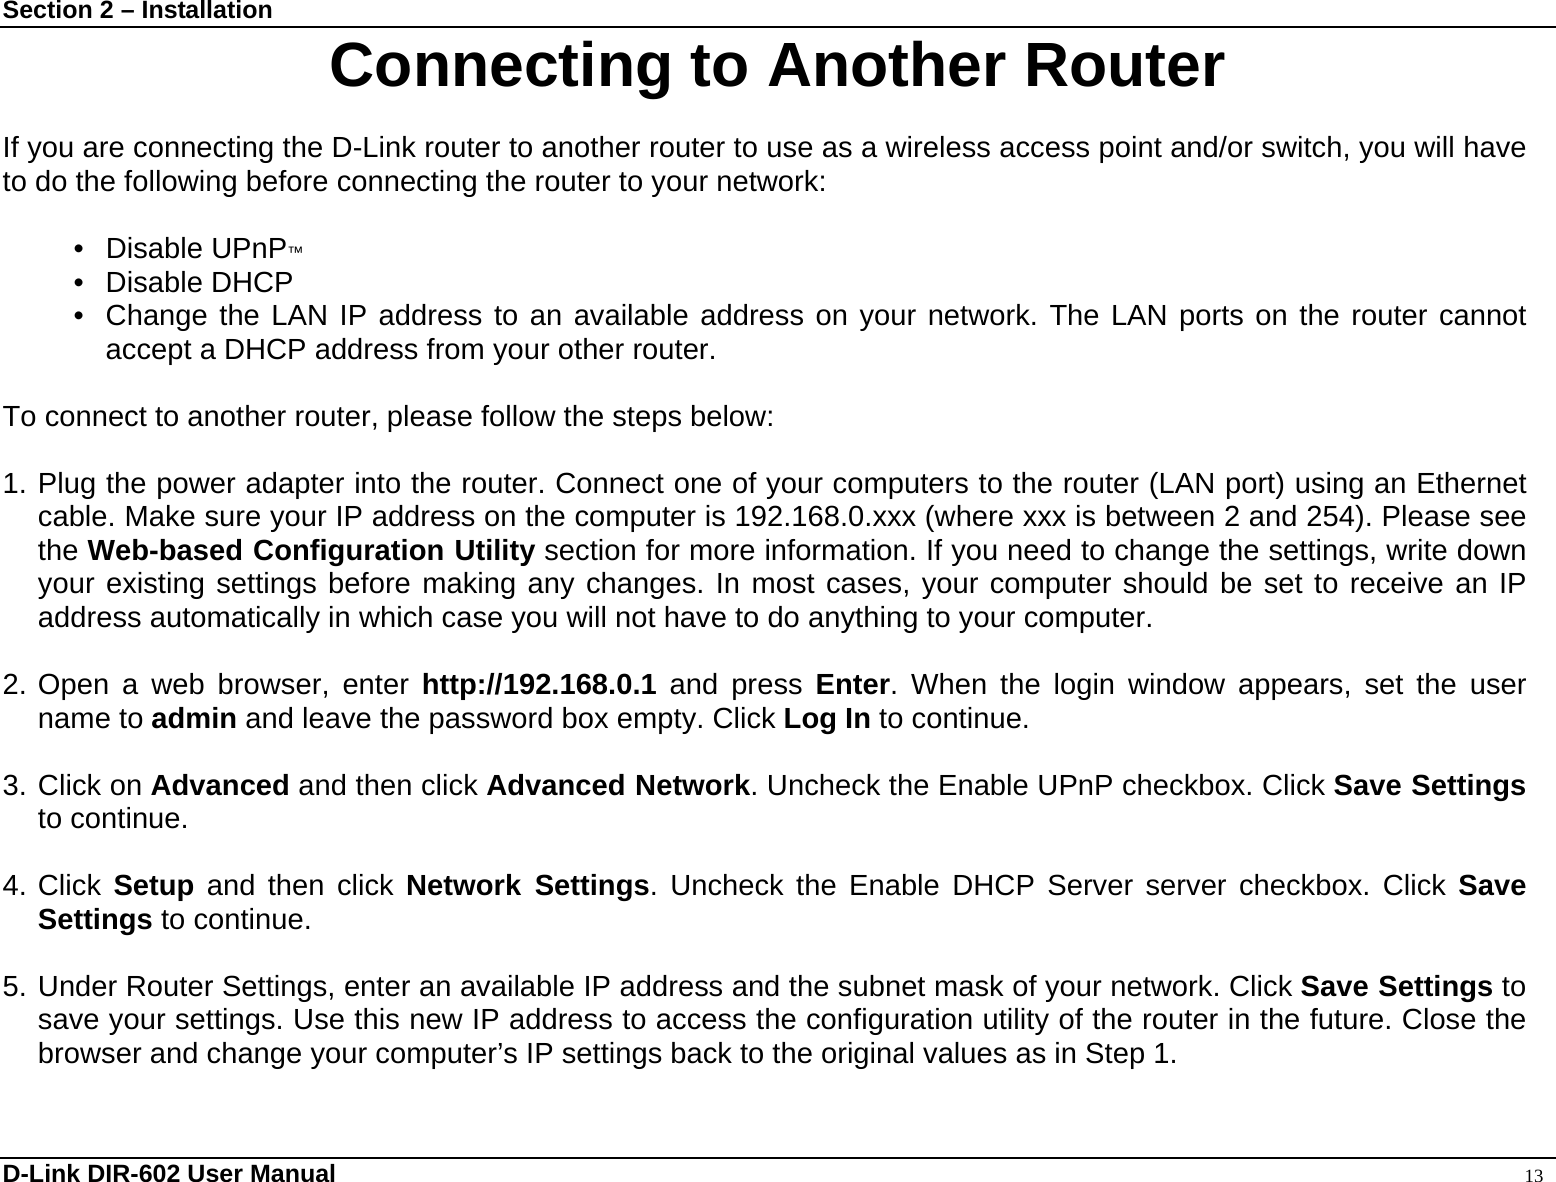 Section 2 – Installation  D-Link DIR-602 User Manual                                                                                               13 Connecting to Another Router  If you are connecting the D-Link router to another router to use as a wireless access point and/or switch, you will have to do the following before connecting the router to your network:  • Disable UPnP™ • Disable DHCP •  Change the LAN IP address to an available address on your network. The LAN ports on the router cannot accept a DHCP address from your other router.  To connect to another router, please follow the steps below:  1. Plug the power adapter into the router. Connect one of your computers to the router (LAN port) using an Ethernet cable. Make sure your IP address on the computer is 192.168.0.xxx (where xxx is between 2 and 254). Please see the Web-based Configuration Utility section for more information. If you need to change the settings, write down your existing settings before making any changes. In most cases, your computer should be set to receive an IP address automatically in which case you will not have to do anything to your computer.  2. Open a web browser, enter http://192.168.0.1 and press Enter. When the login window appears, set the user name to admin and leave the password box empty. Click Log In to continue.  3. Click on Advanced and then click Advanced Network. Uncheck the Enable UPnP checkbox. Click Save Settings to continue.    4. Click Setup and then click Network Settings. Uncheck the Enable DHCP Server server checkbox. Click Save Settings to continue.  5. Under Router Settings, enter an available IP address and the subnet mask of your network. Click Save Settings to save your settings. Use this new IP address to access the configuration utility of the router in the future. Close the browser and change your computer’s IP settings back to the original values as in Step 1.  